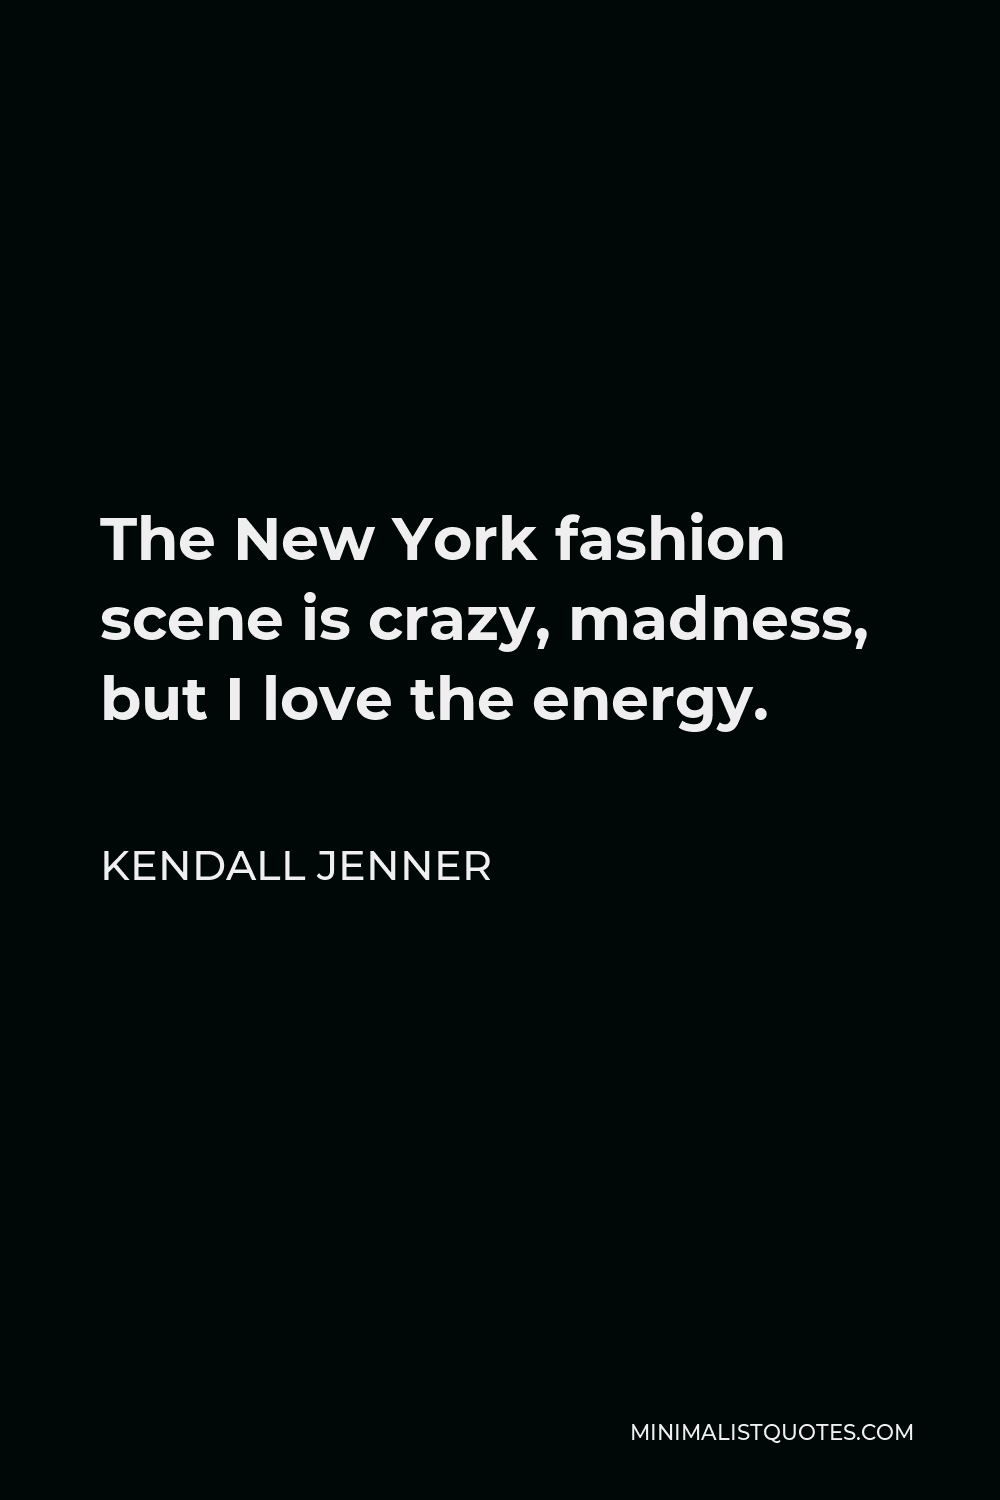 Kendall Jenner Quote - The New York fashion scene is crazy, madness, but I love the energy.